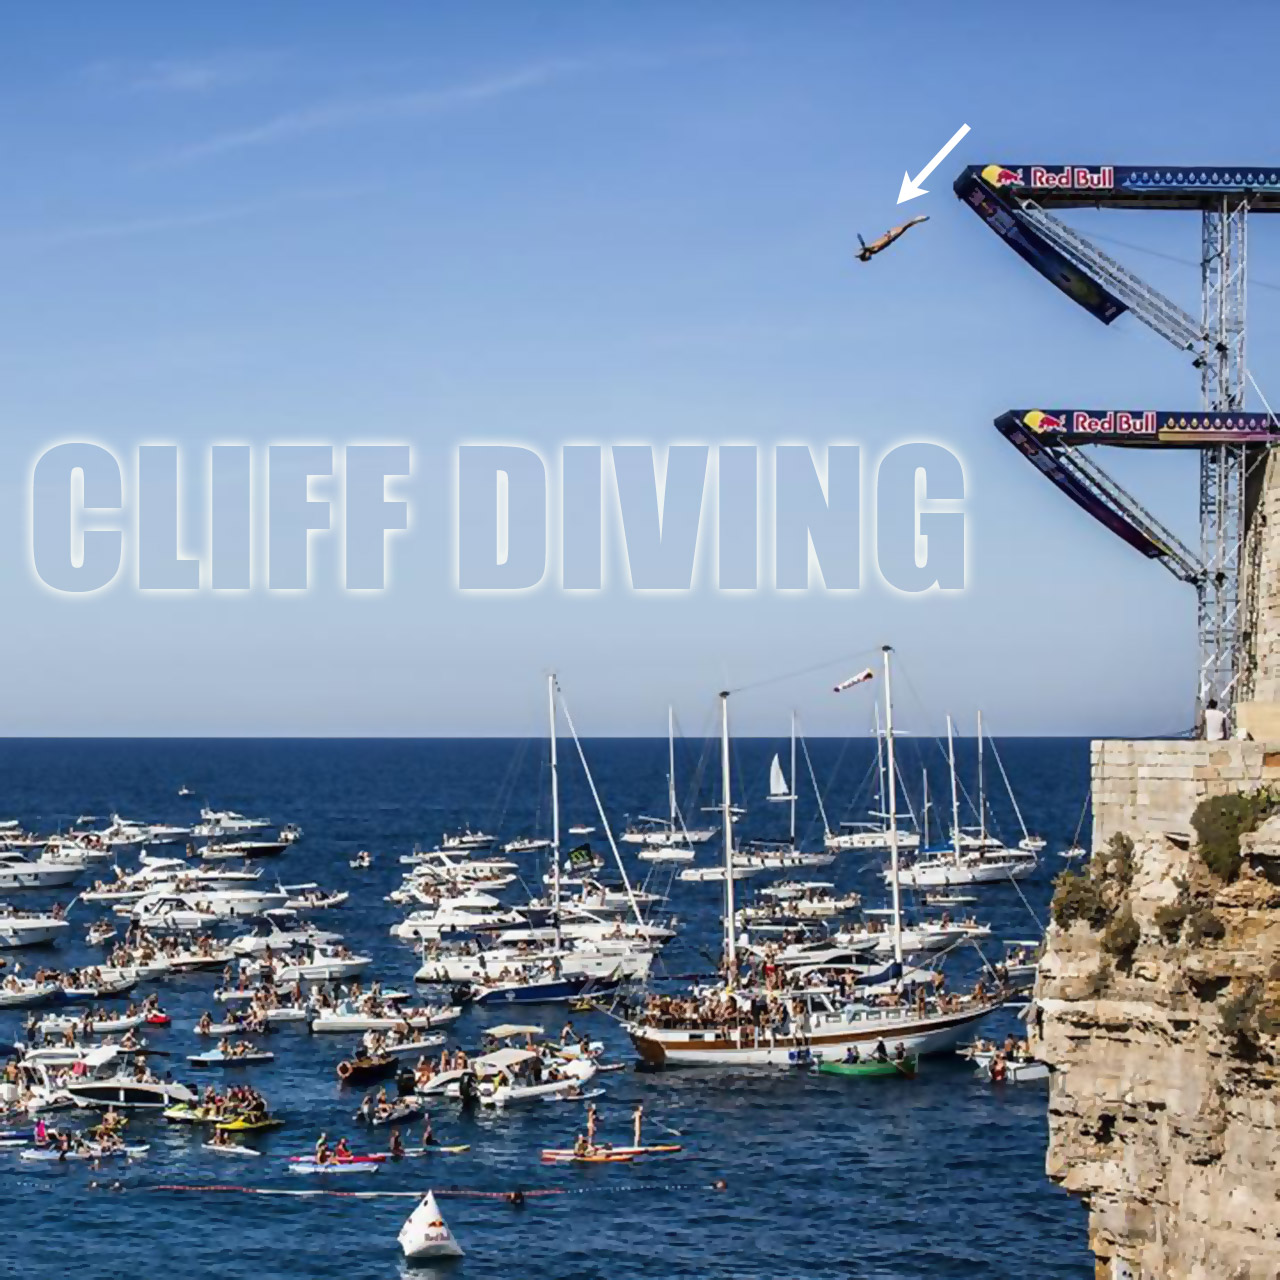 Red Bull Cliff Diving World Series in Italy